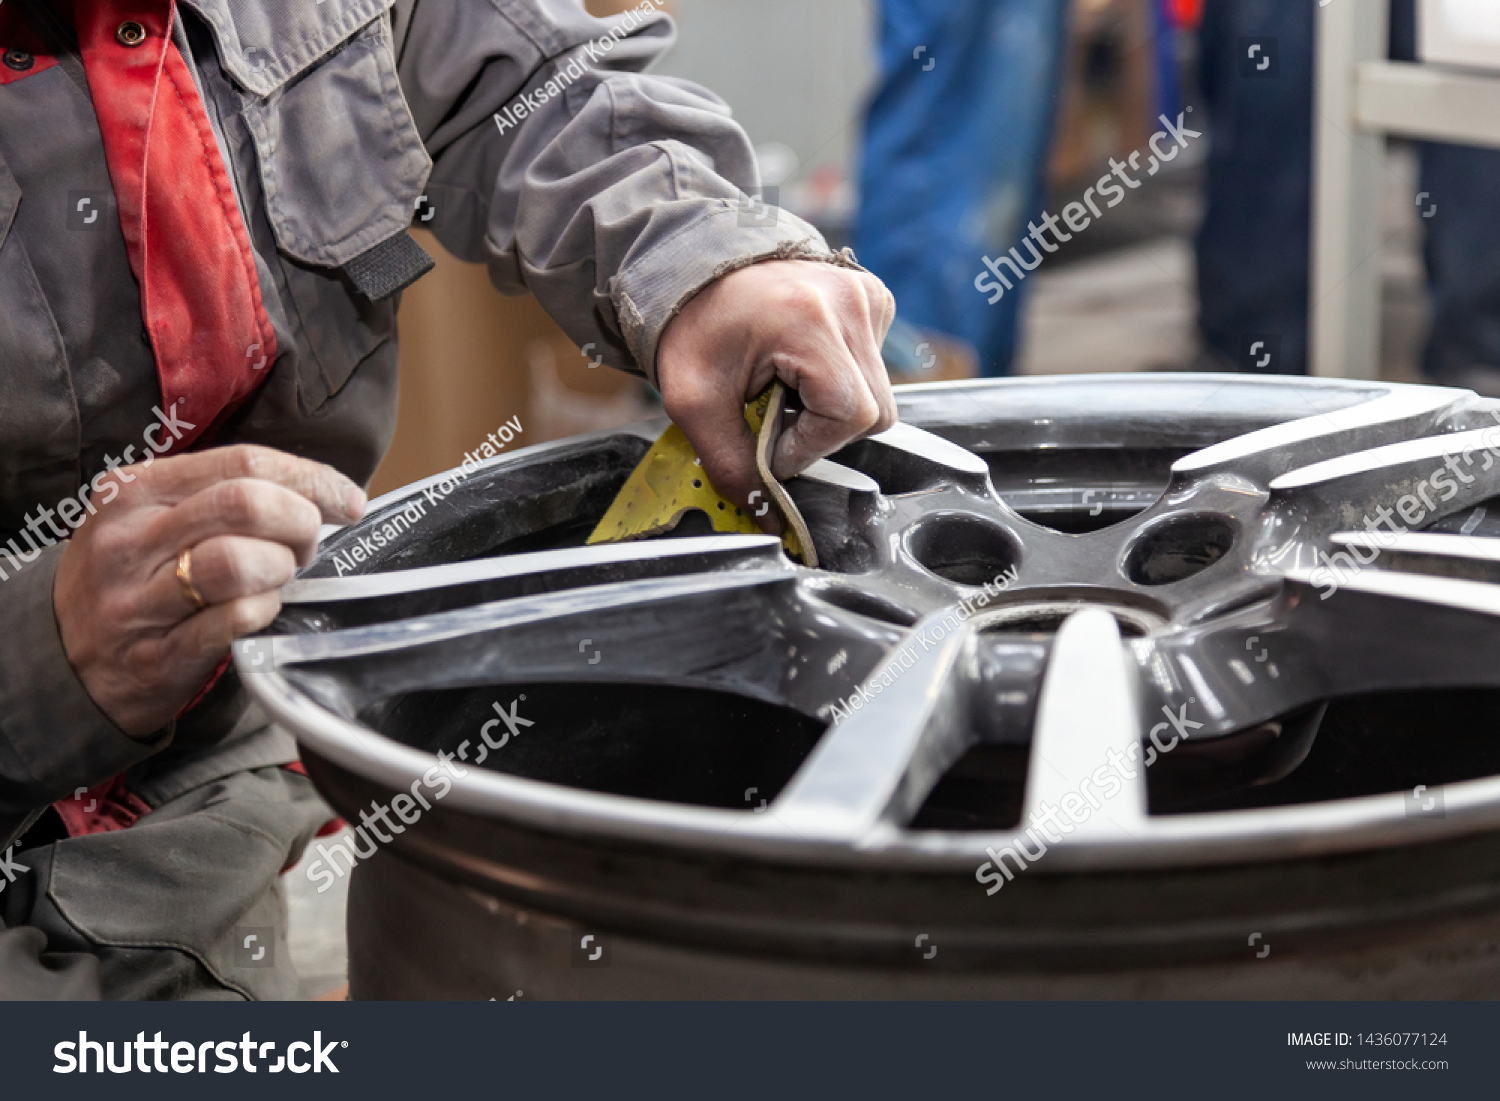 Master body repair man is working on preparing the surface of the aluminum wheel of the car for subsequent painting in the workshop, cleaning and leveling the disk with the help of abrasive material #1436077124